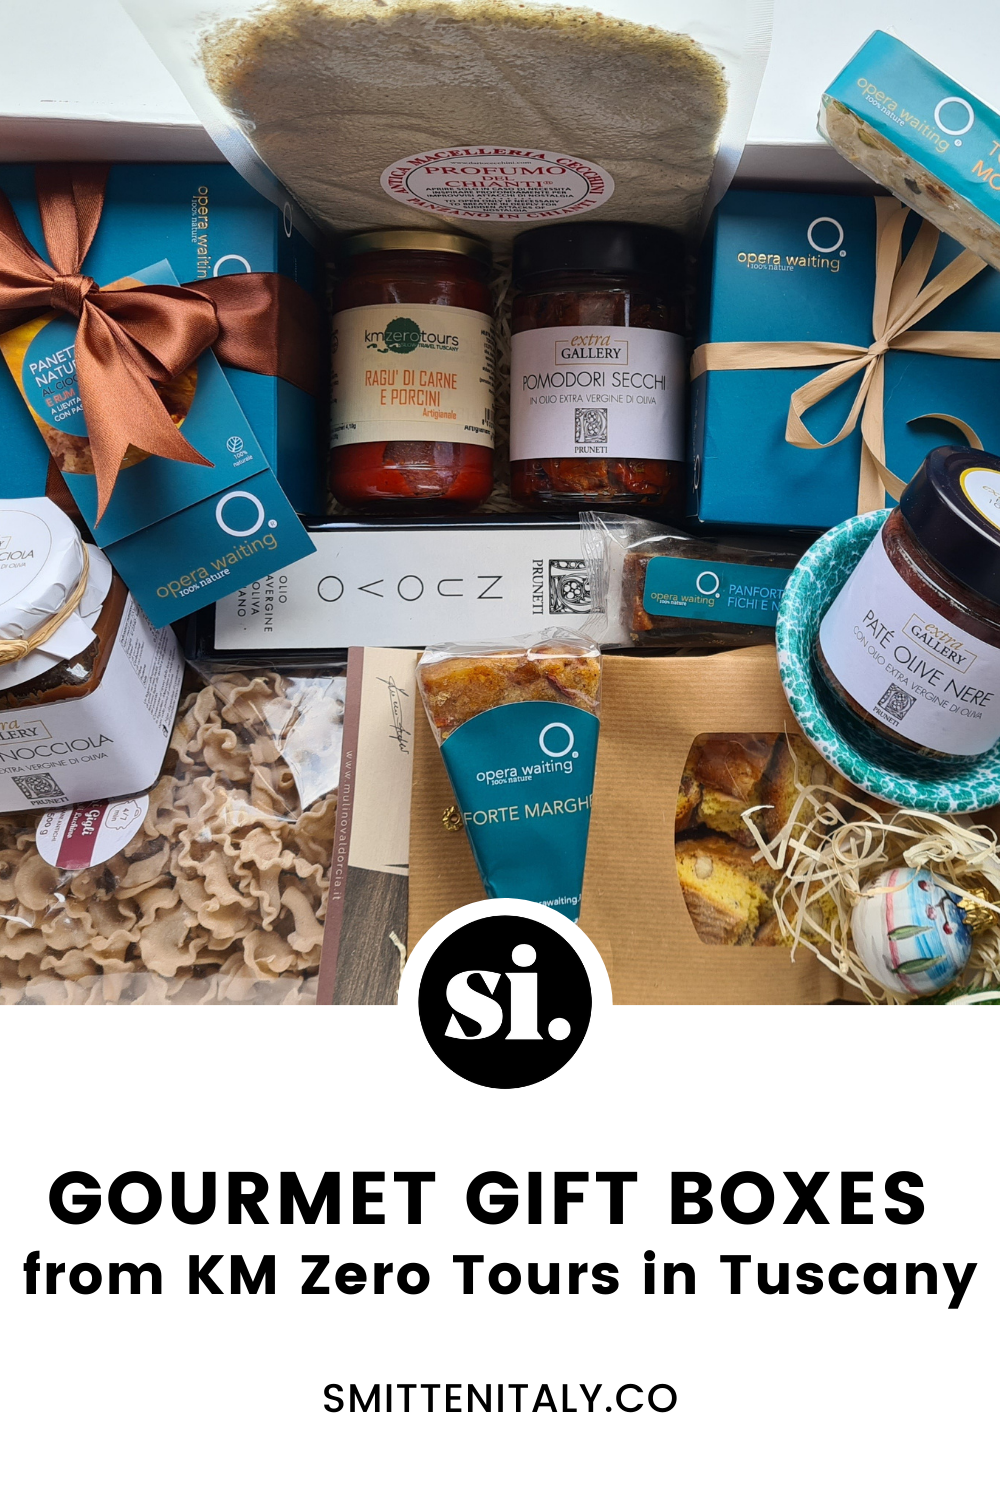 Gourmet Gift Boxes from Tuscany: KM Zero Tours 17